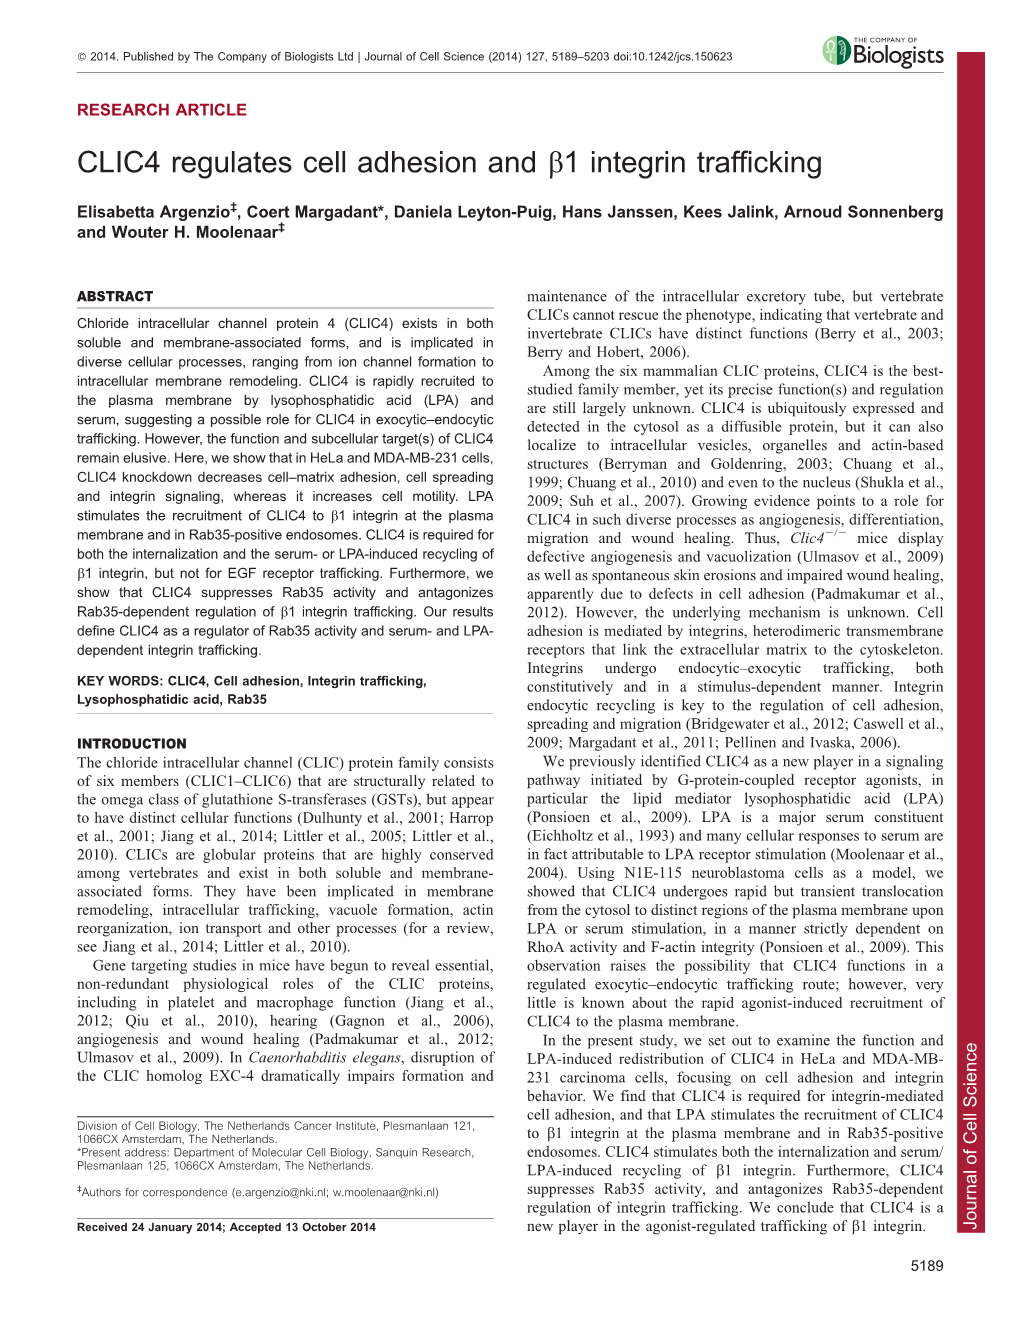 CLIC4 Regulates Cell Adhesion and B1 Integrin Trafficking